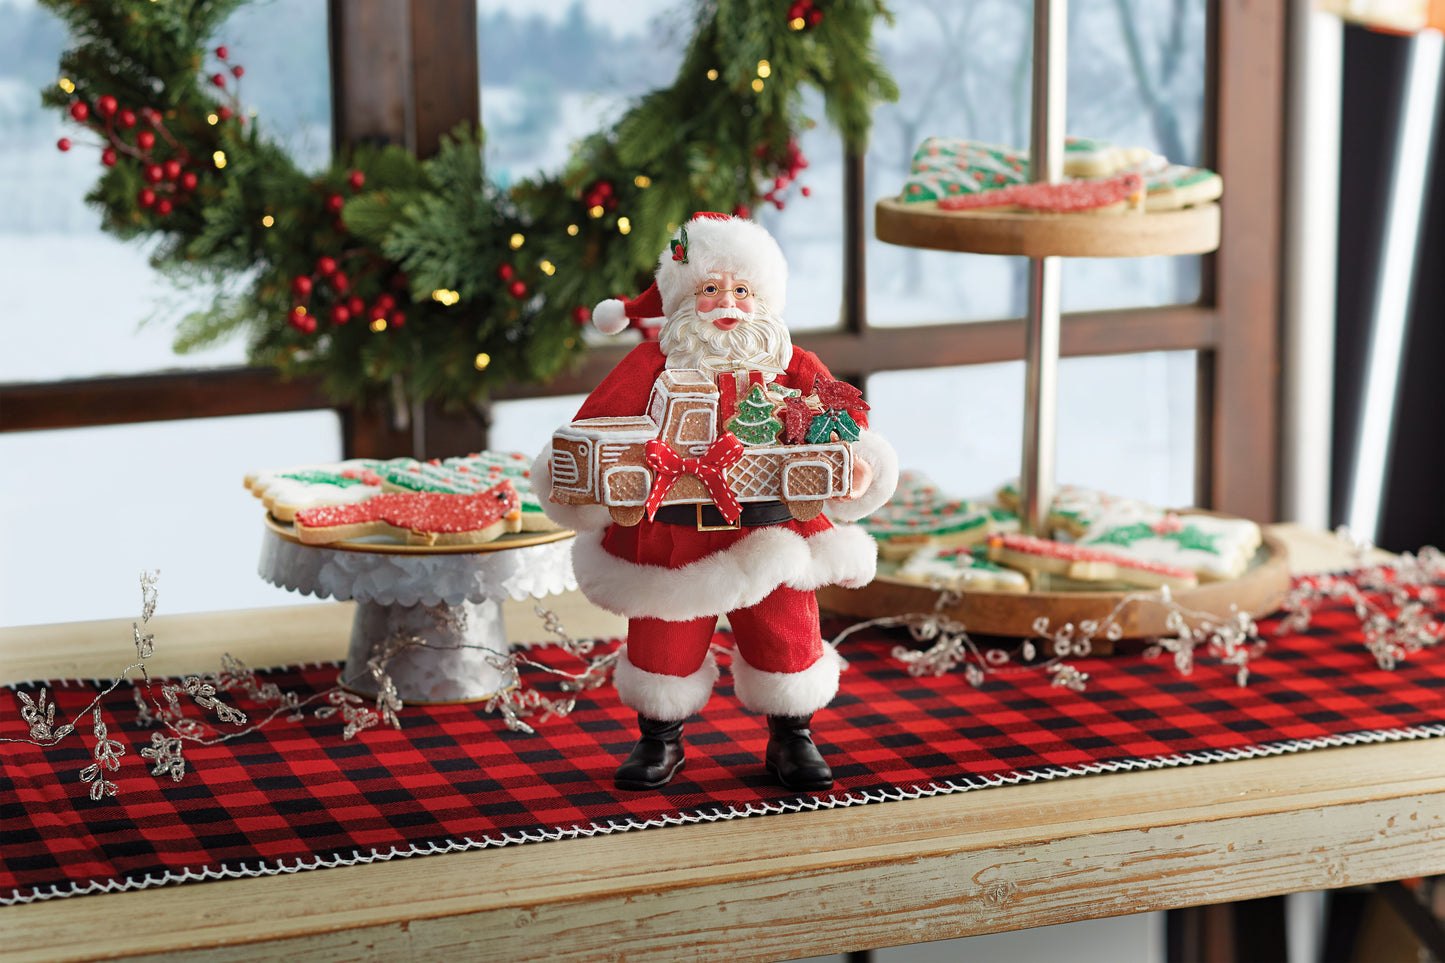 Tailgate Party Santa Figurine by Possible Dreams